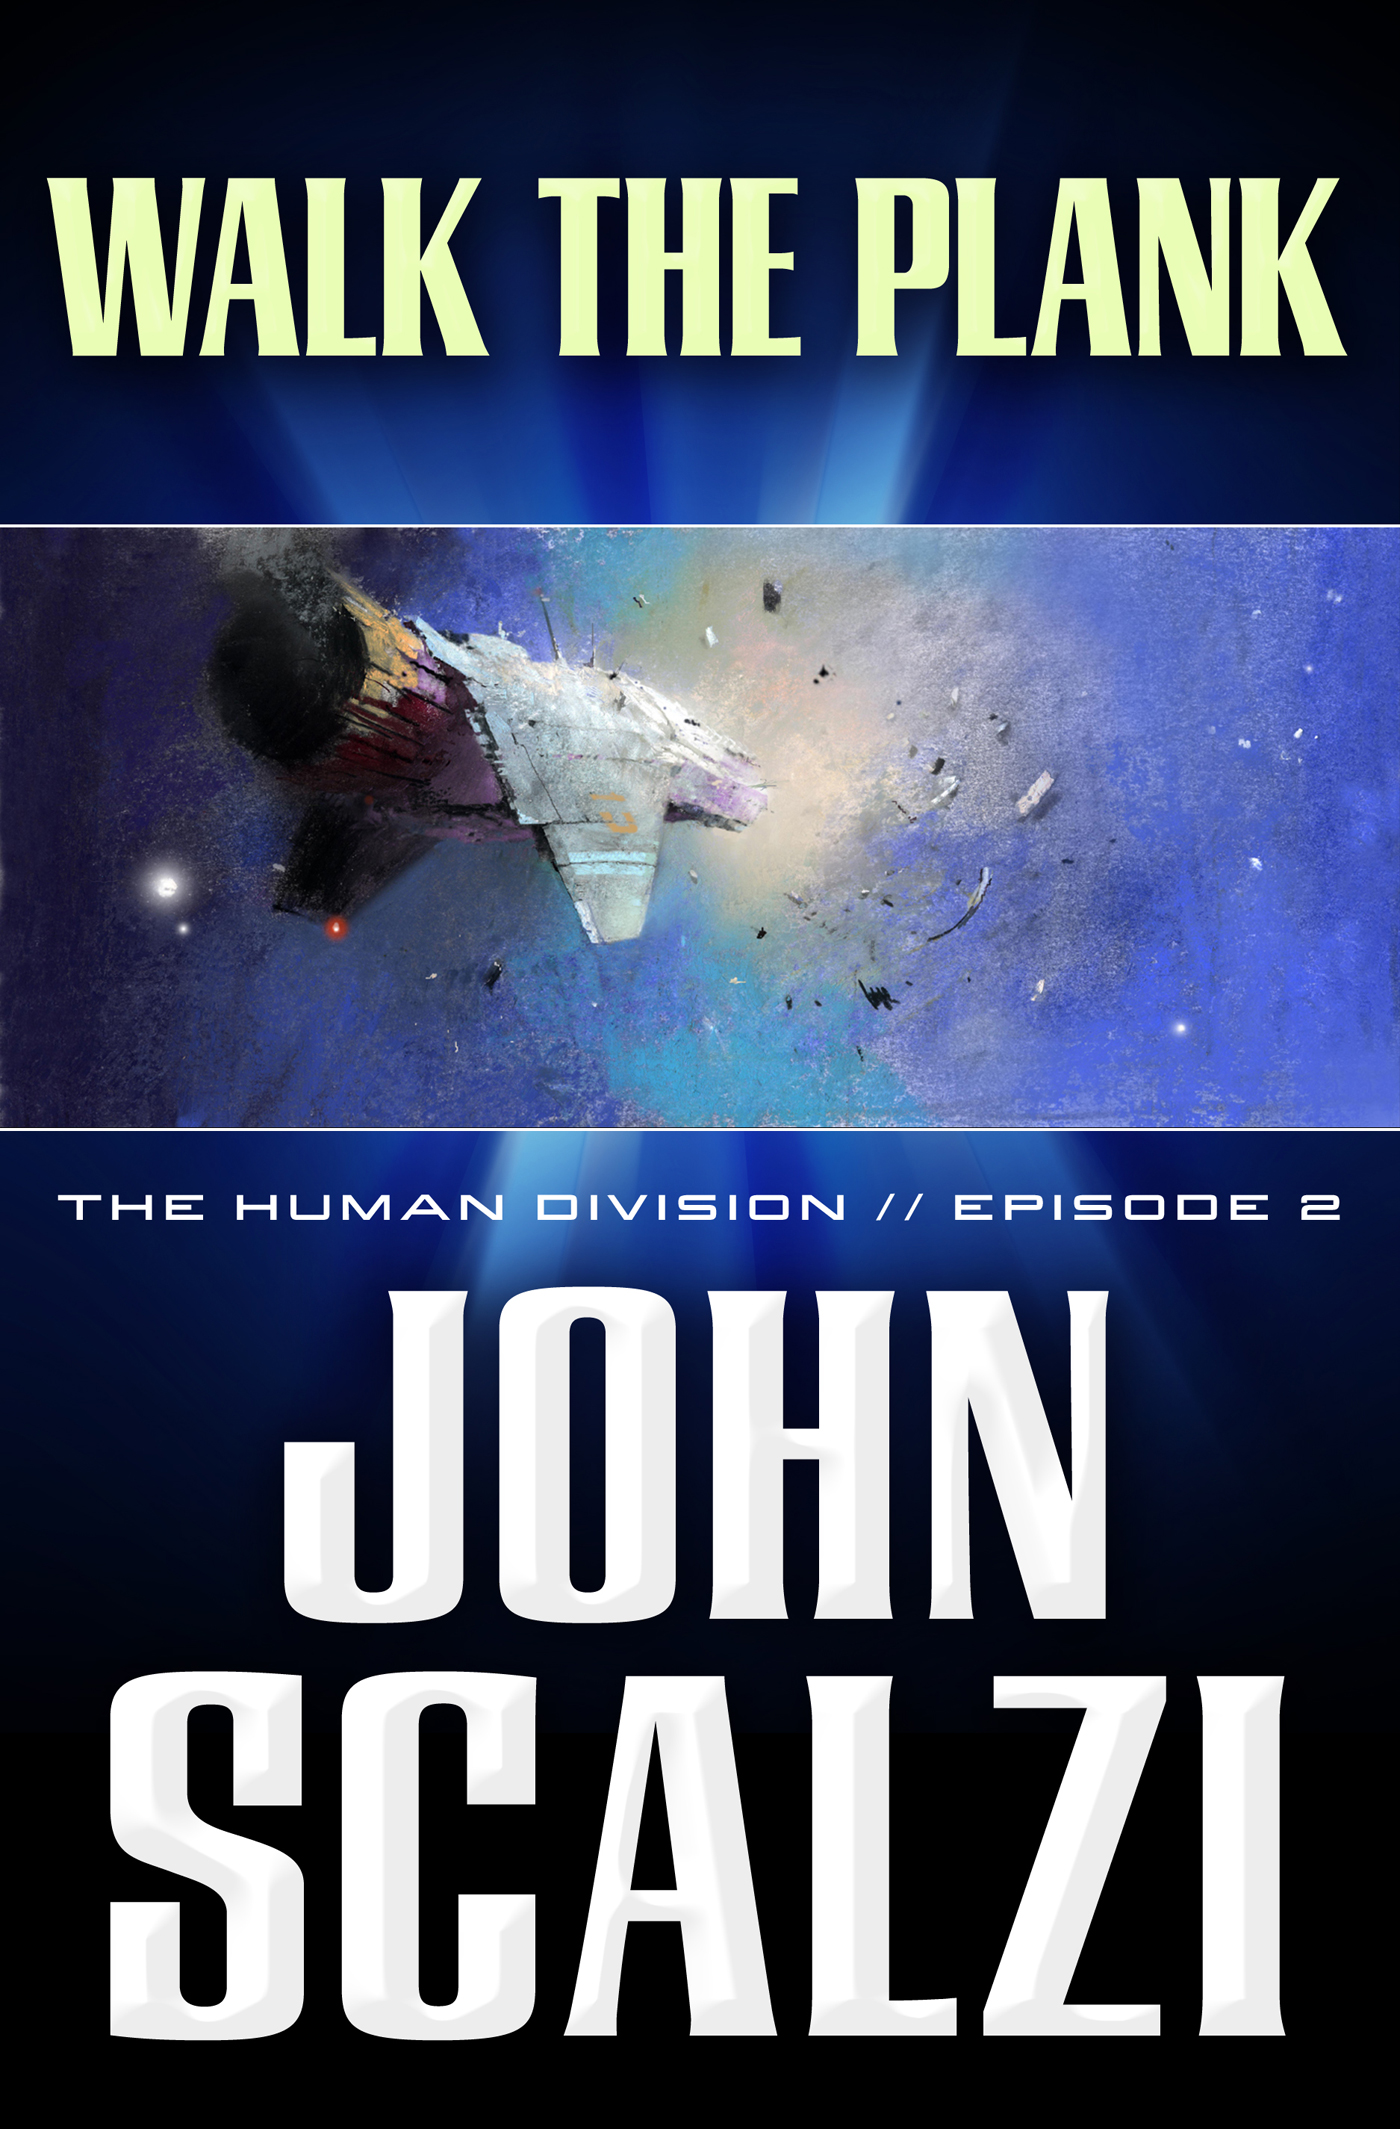 The Human Division #2: Walk the Plank by John Scalzi